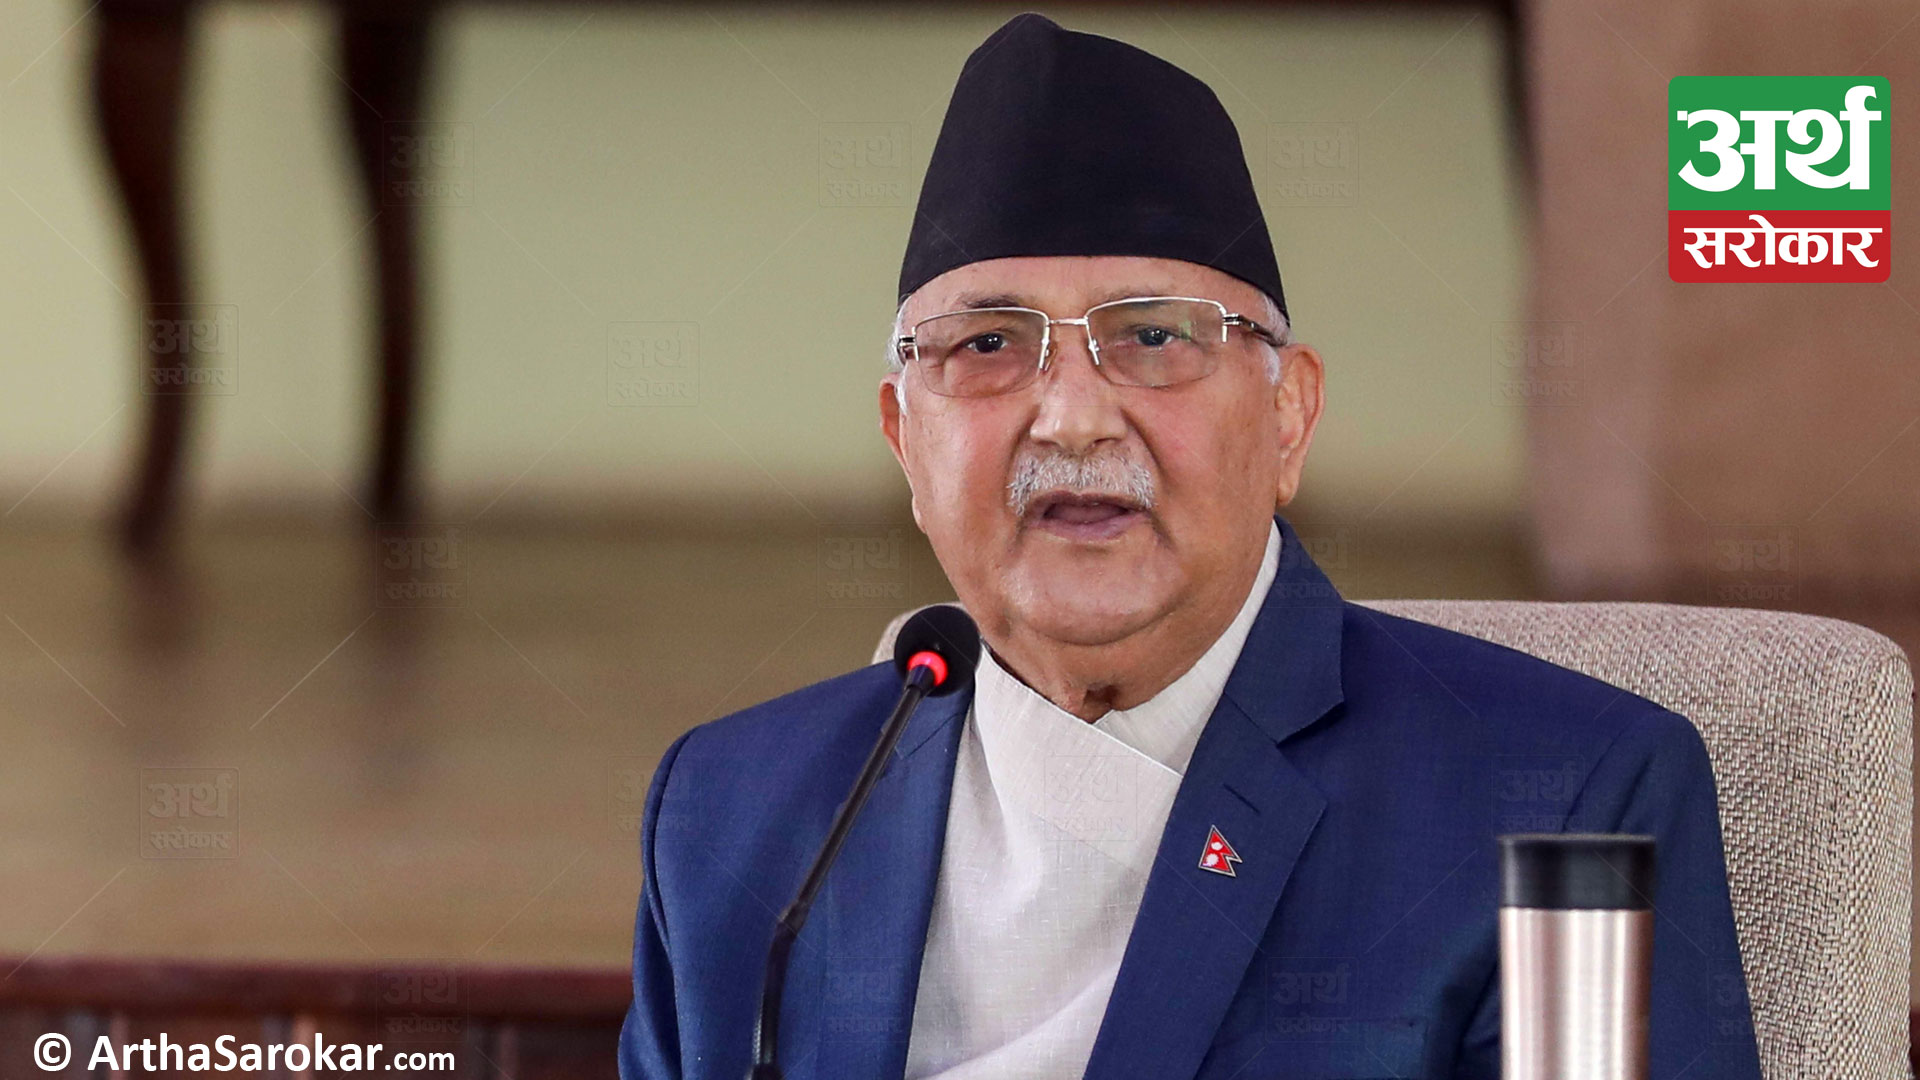 Chair Oli announces to provide Rs 1 million for educational development